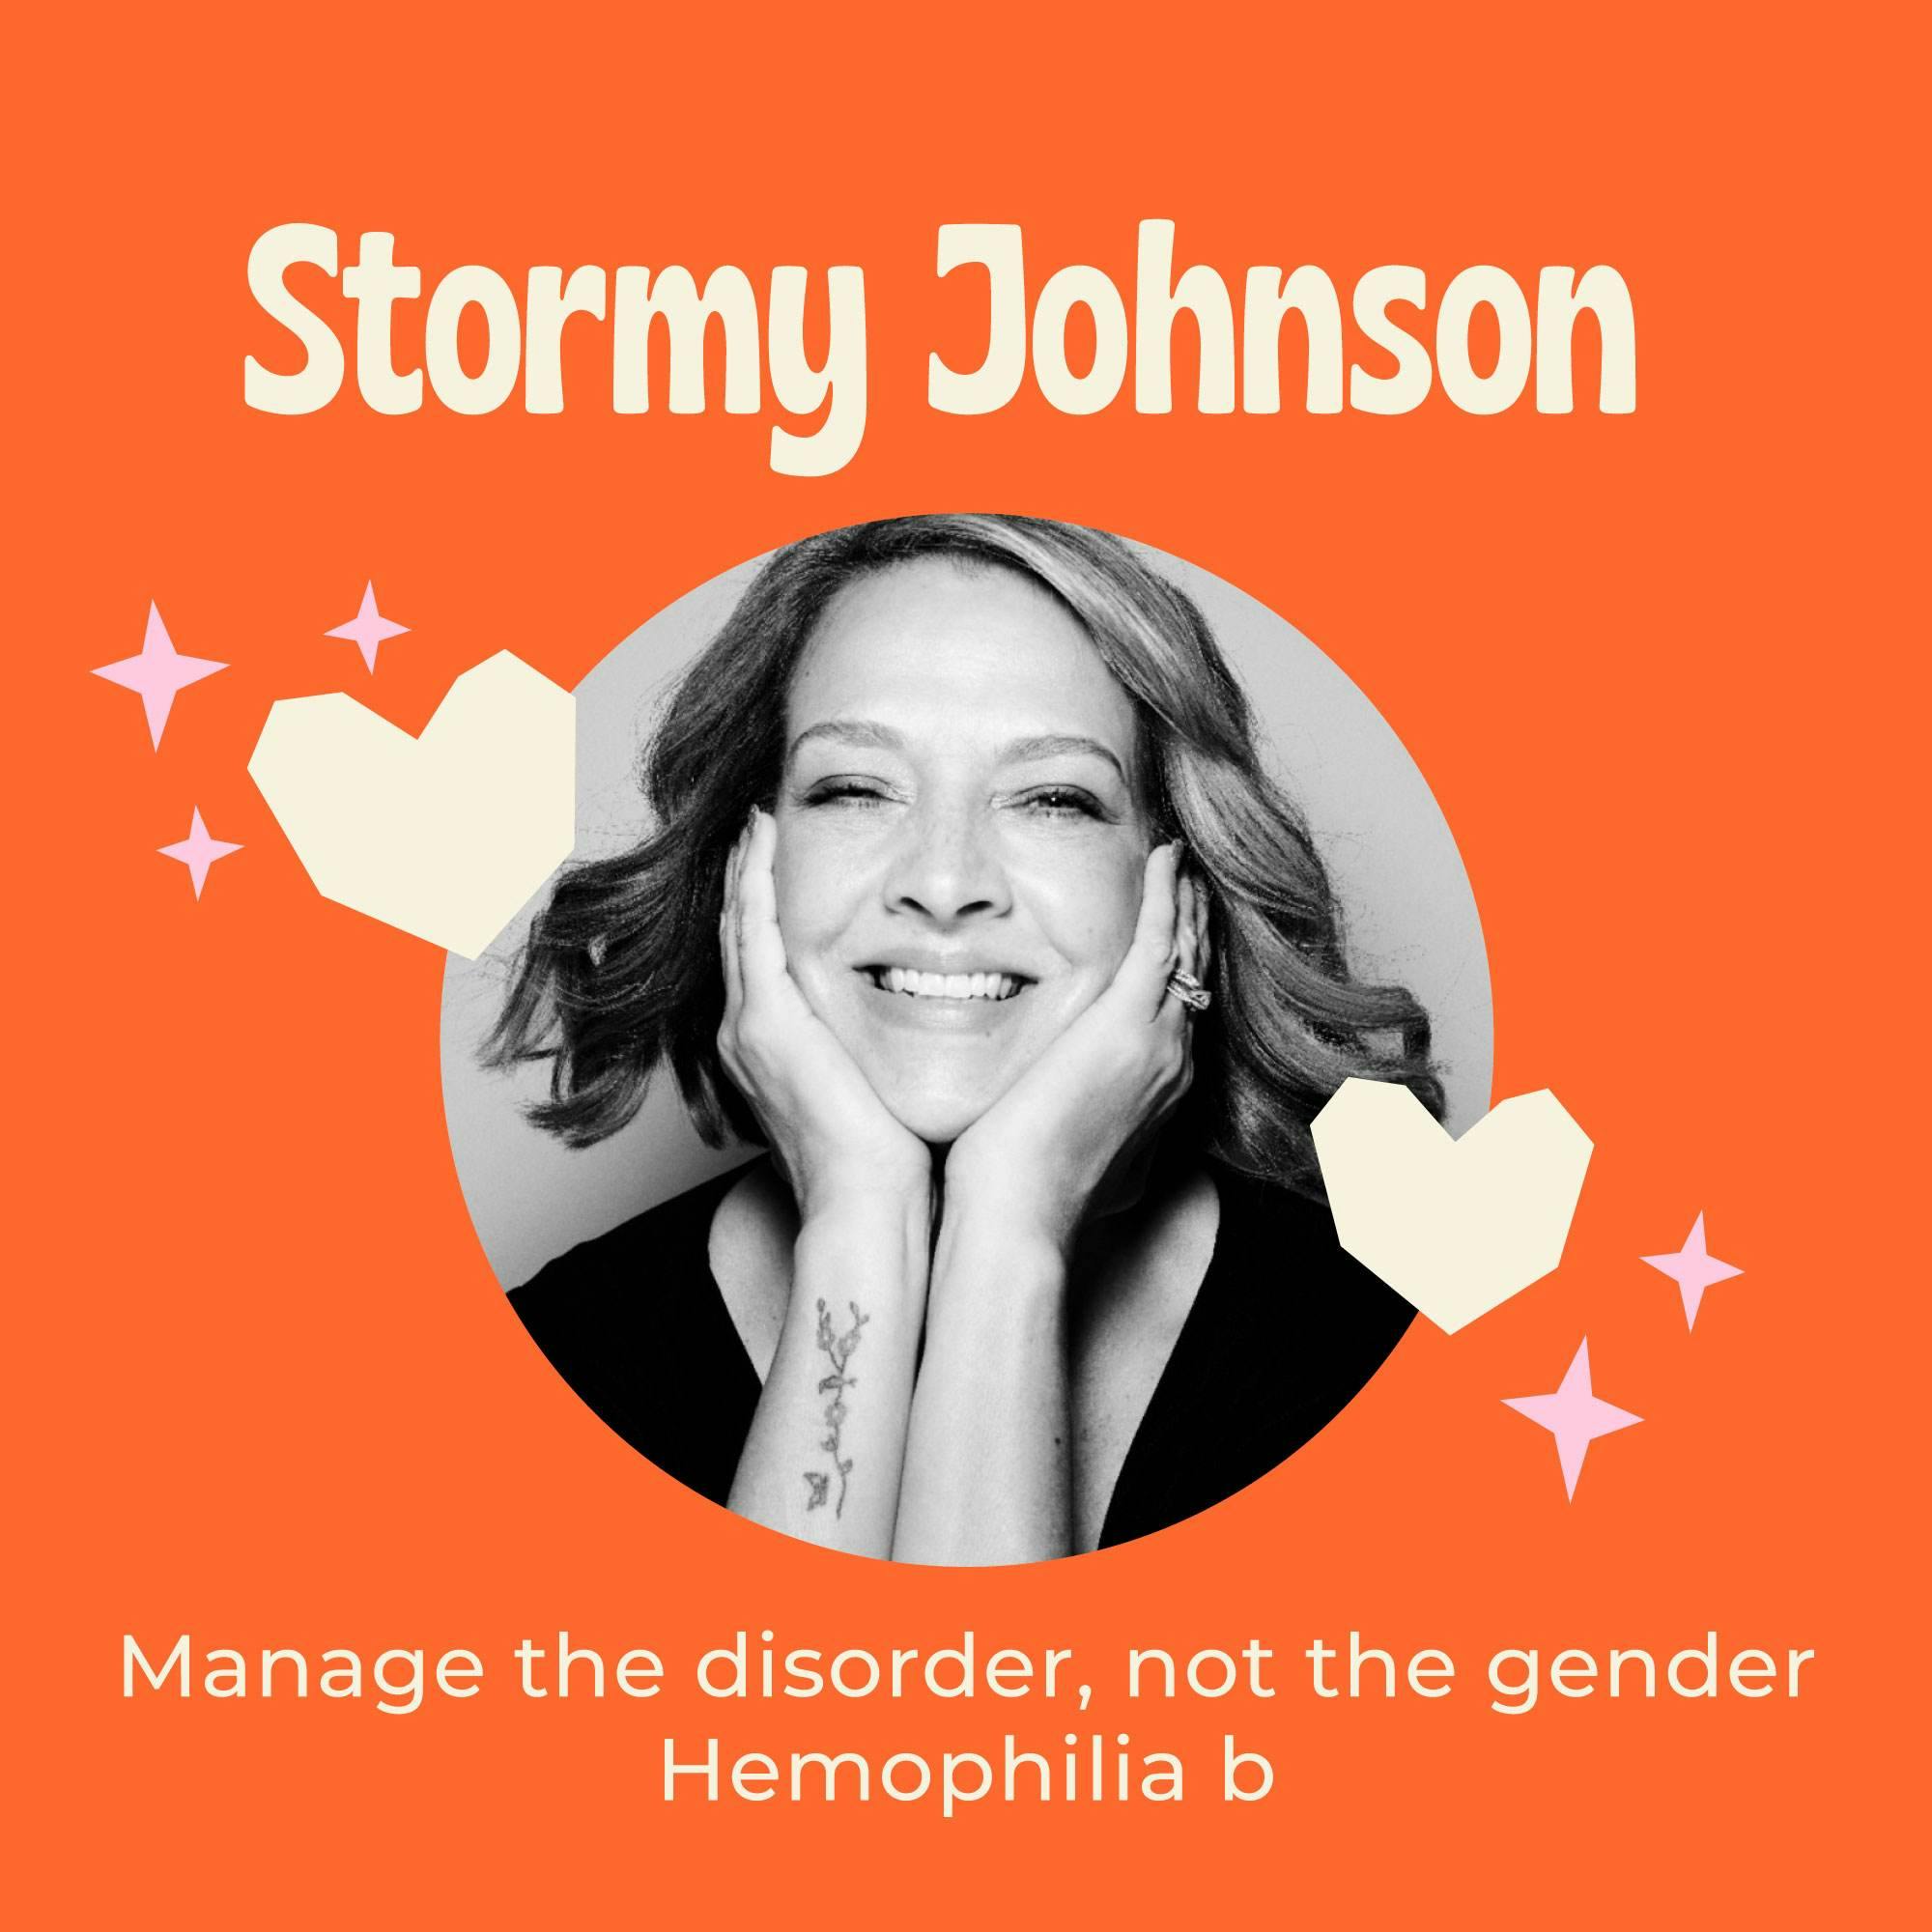 A Mom’s Advocacy For Her Son Who Has Hemophilia B Led to Her Own Diagnosis – With Stormy Johnson